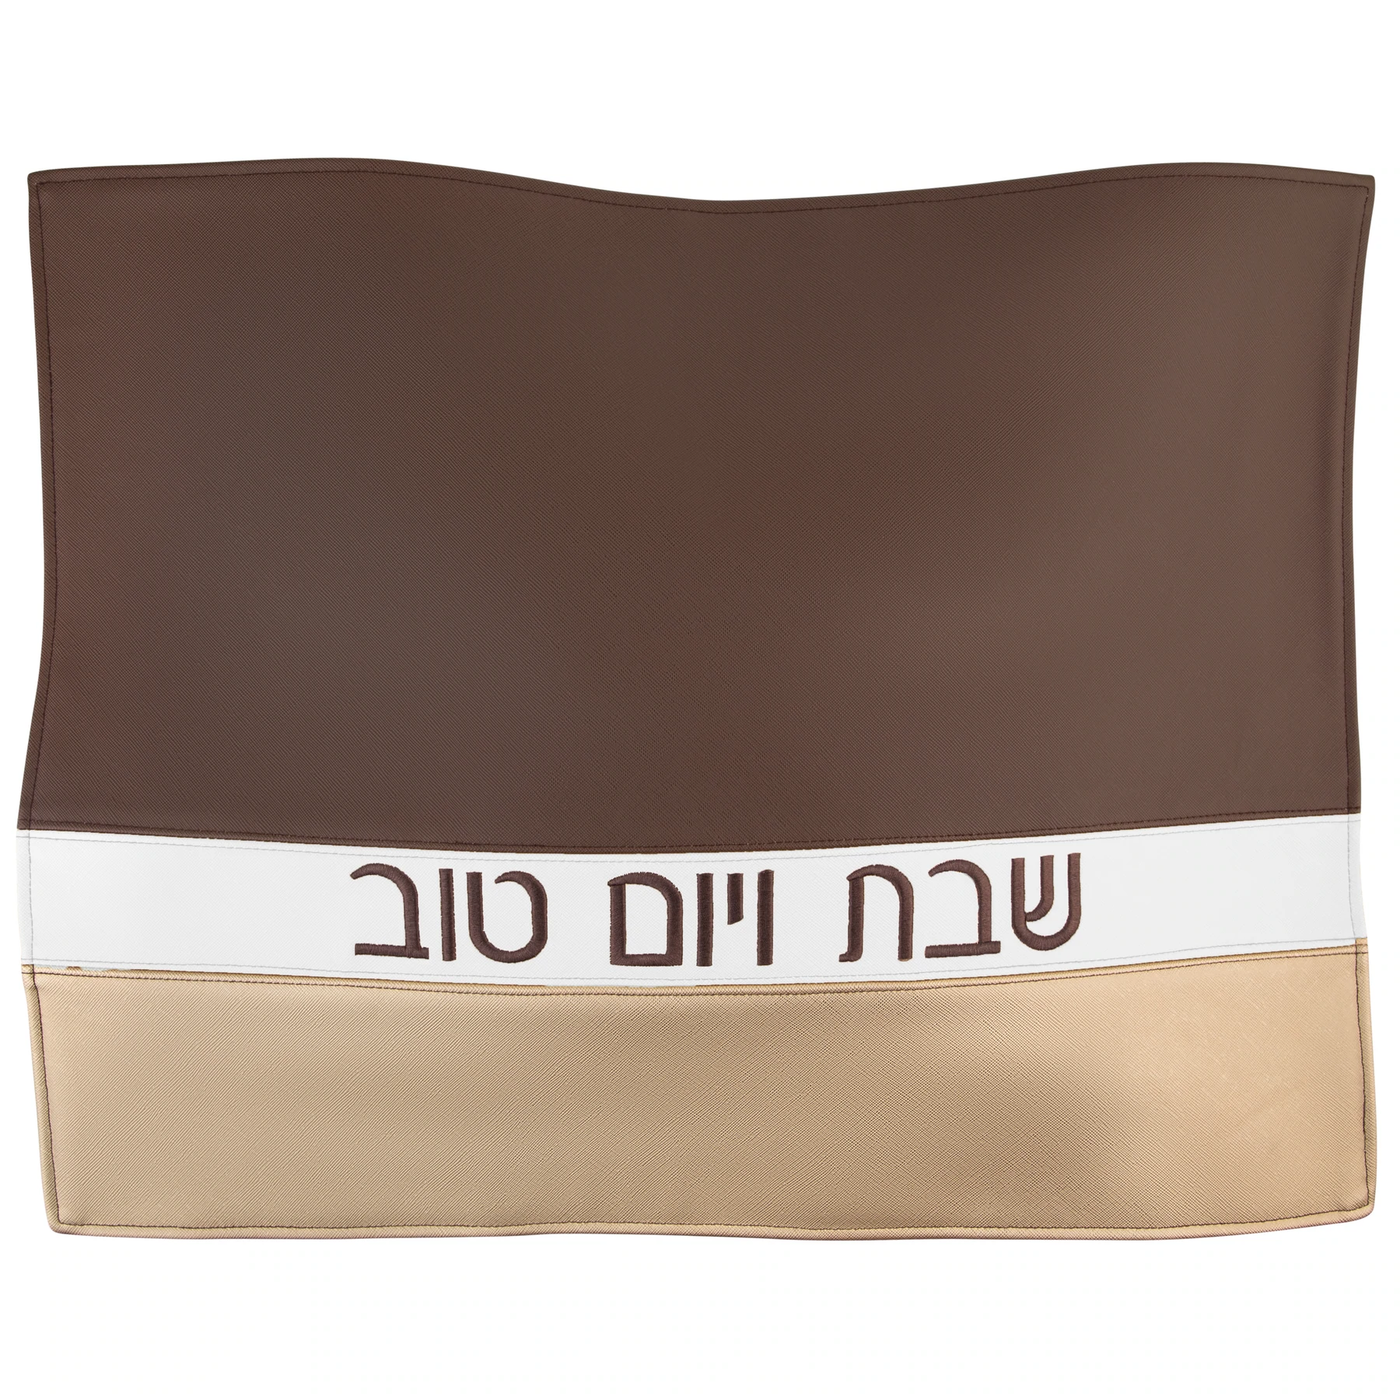 Horizontal Lined Challah Cover - Brown & White & Gold